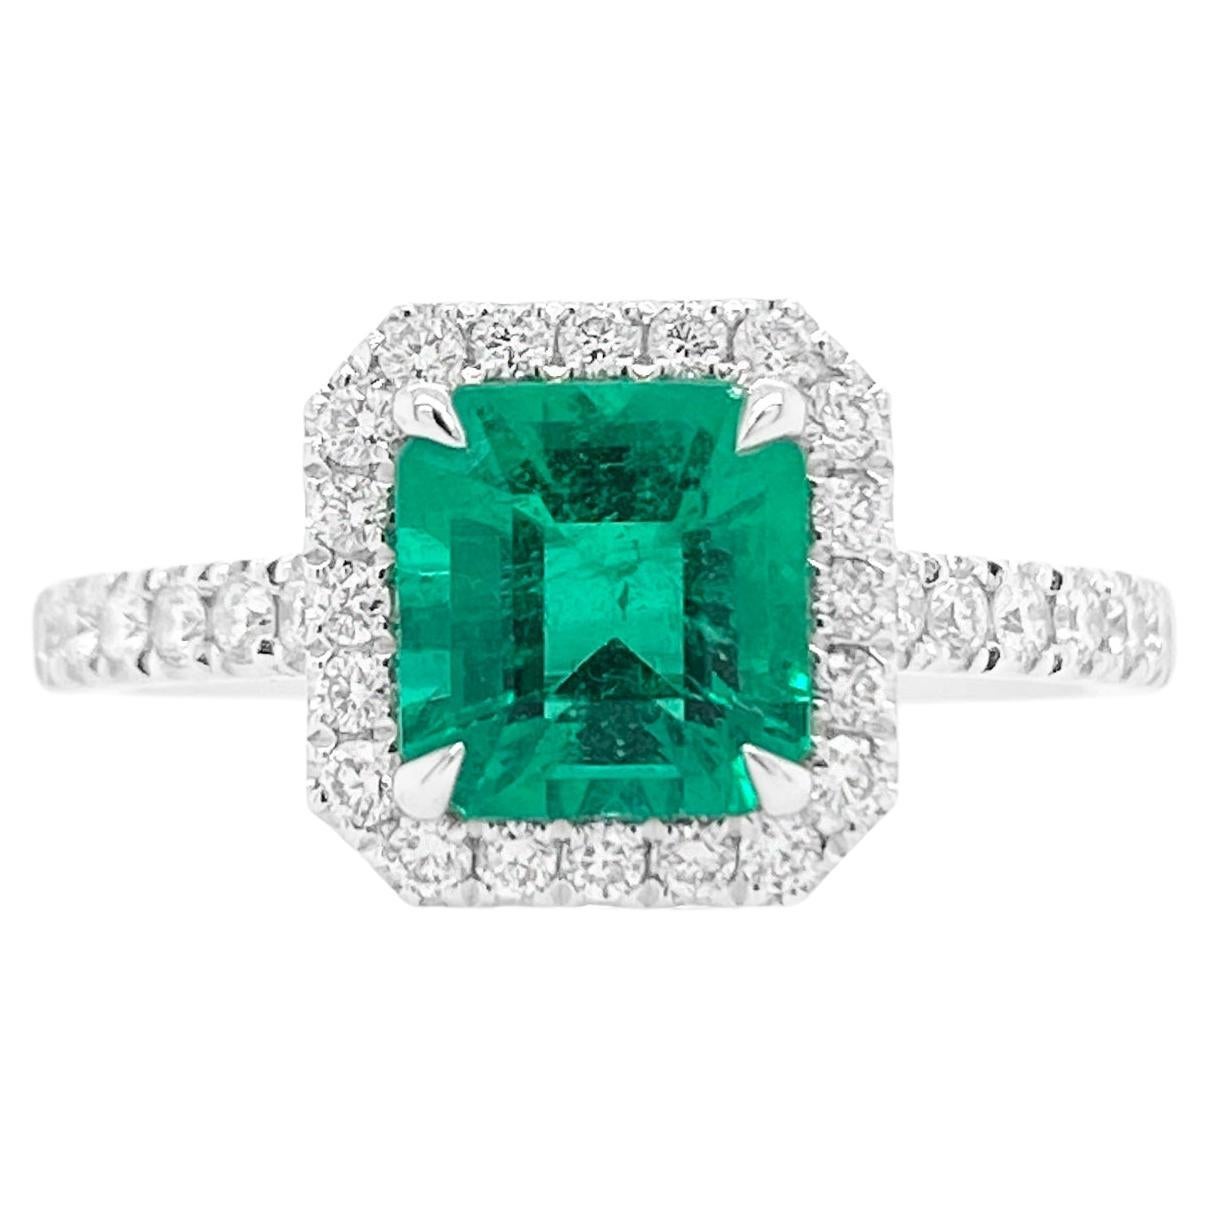 Vivid Green Colombian Emerald Ring set in White diamonds For Sale